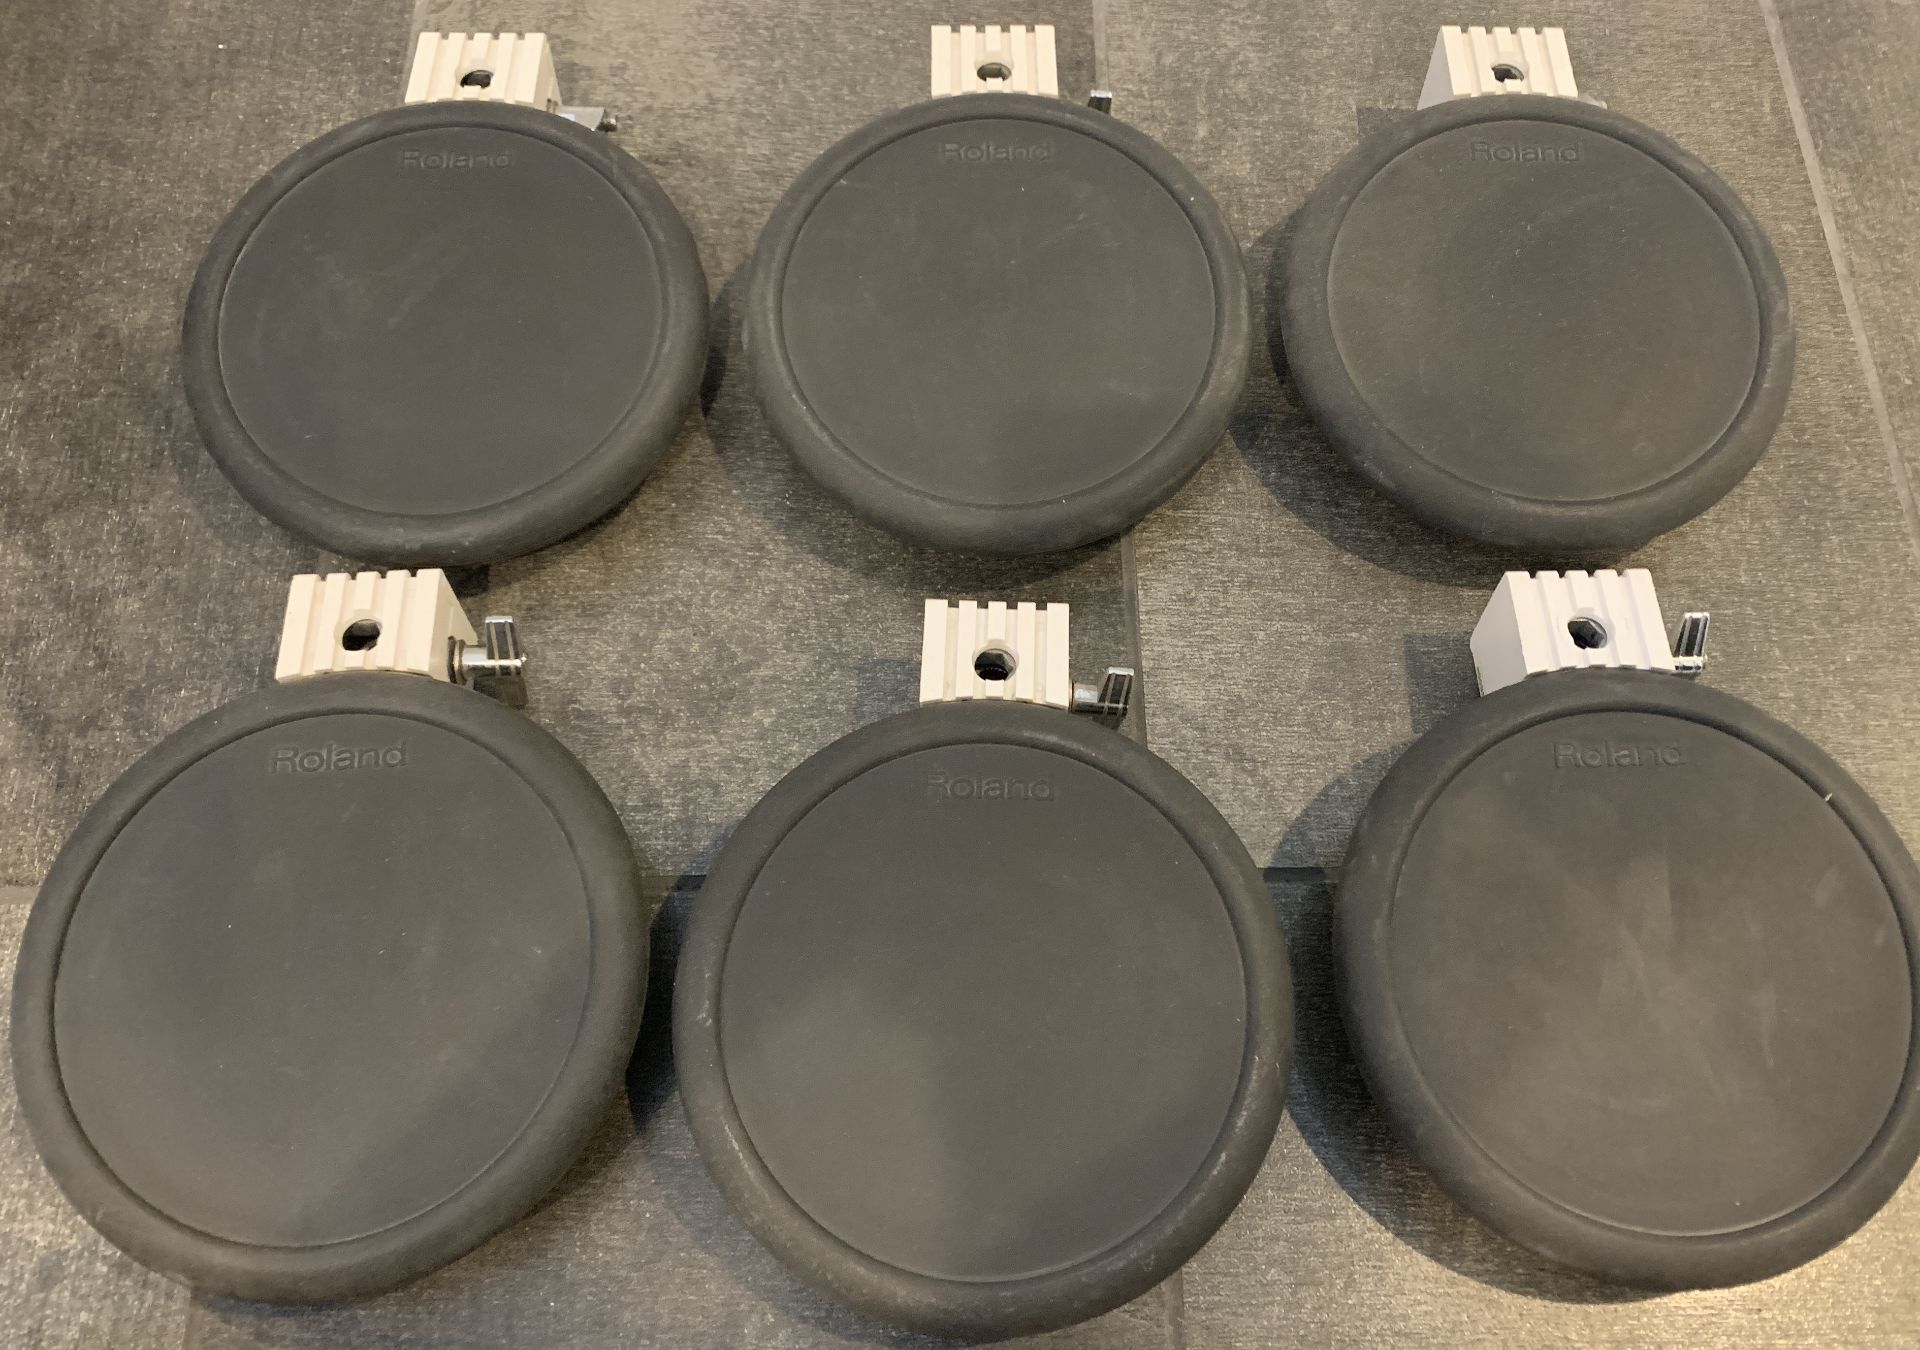 6 ROLAND PD-7 ELECTRONIC DRUM UNIT PADS - Image 2 of 2